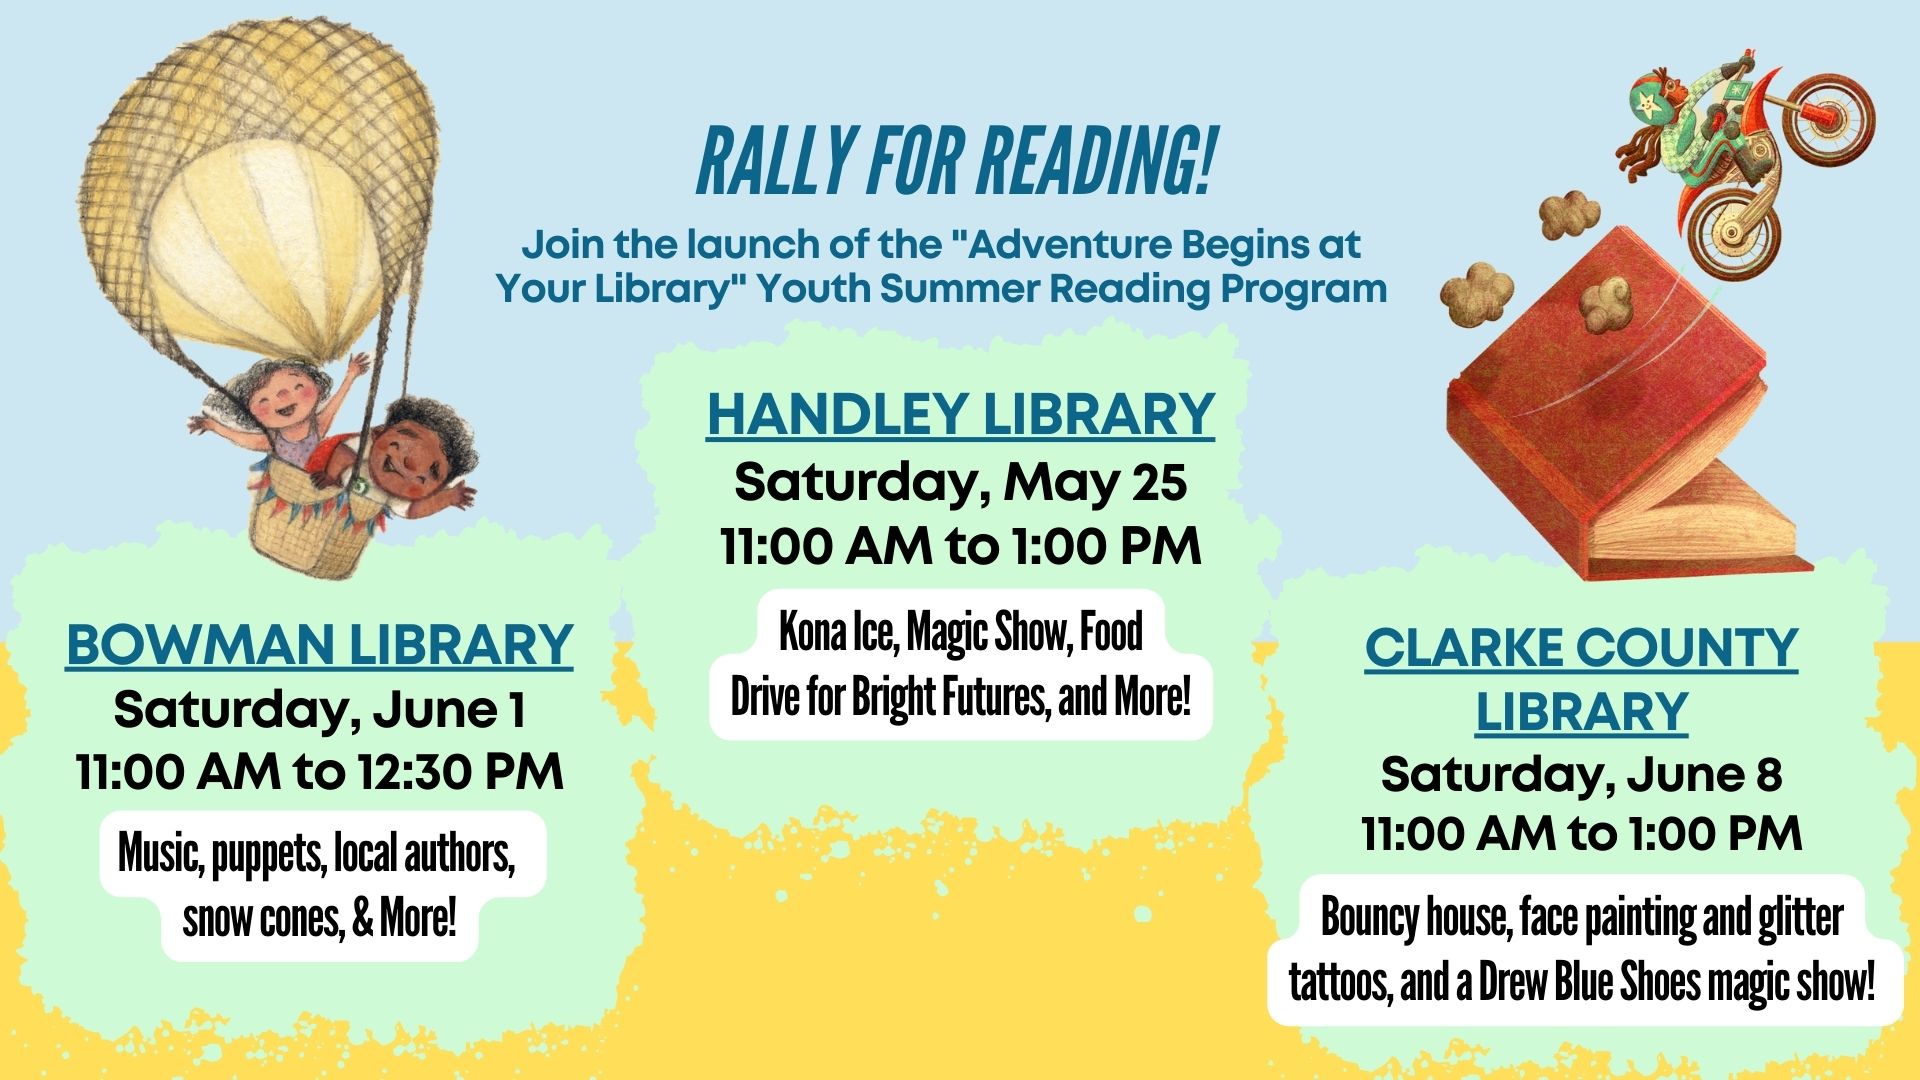 Rally for Reading